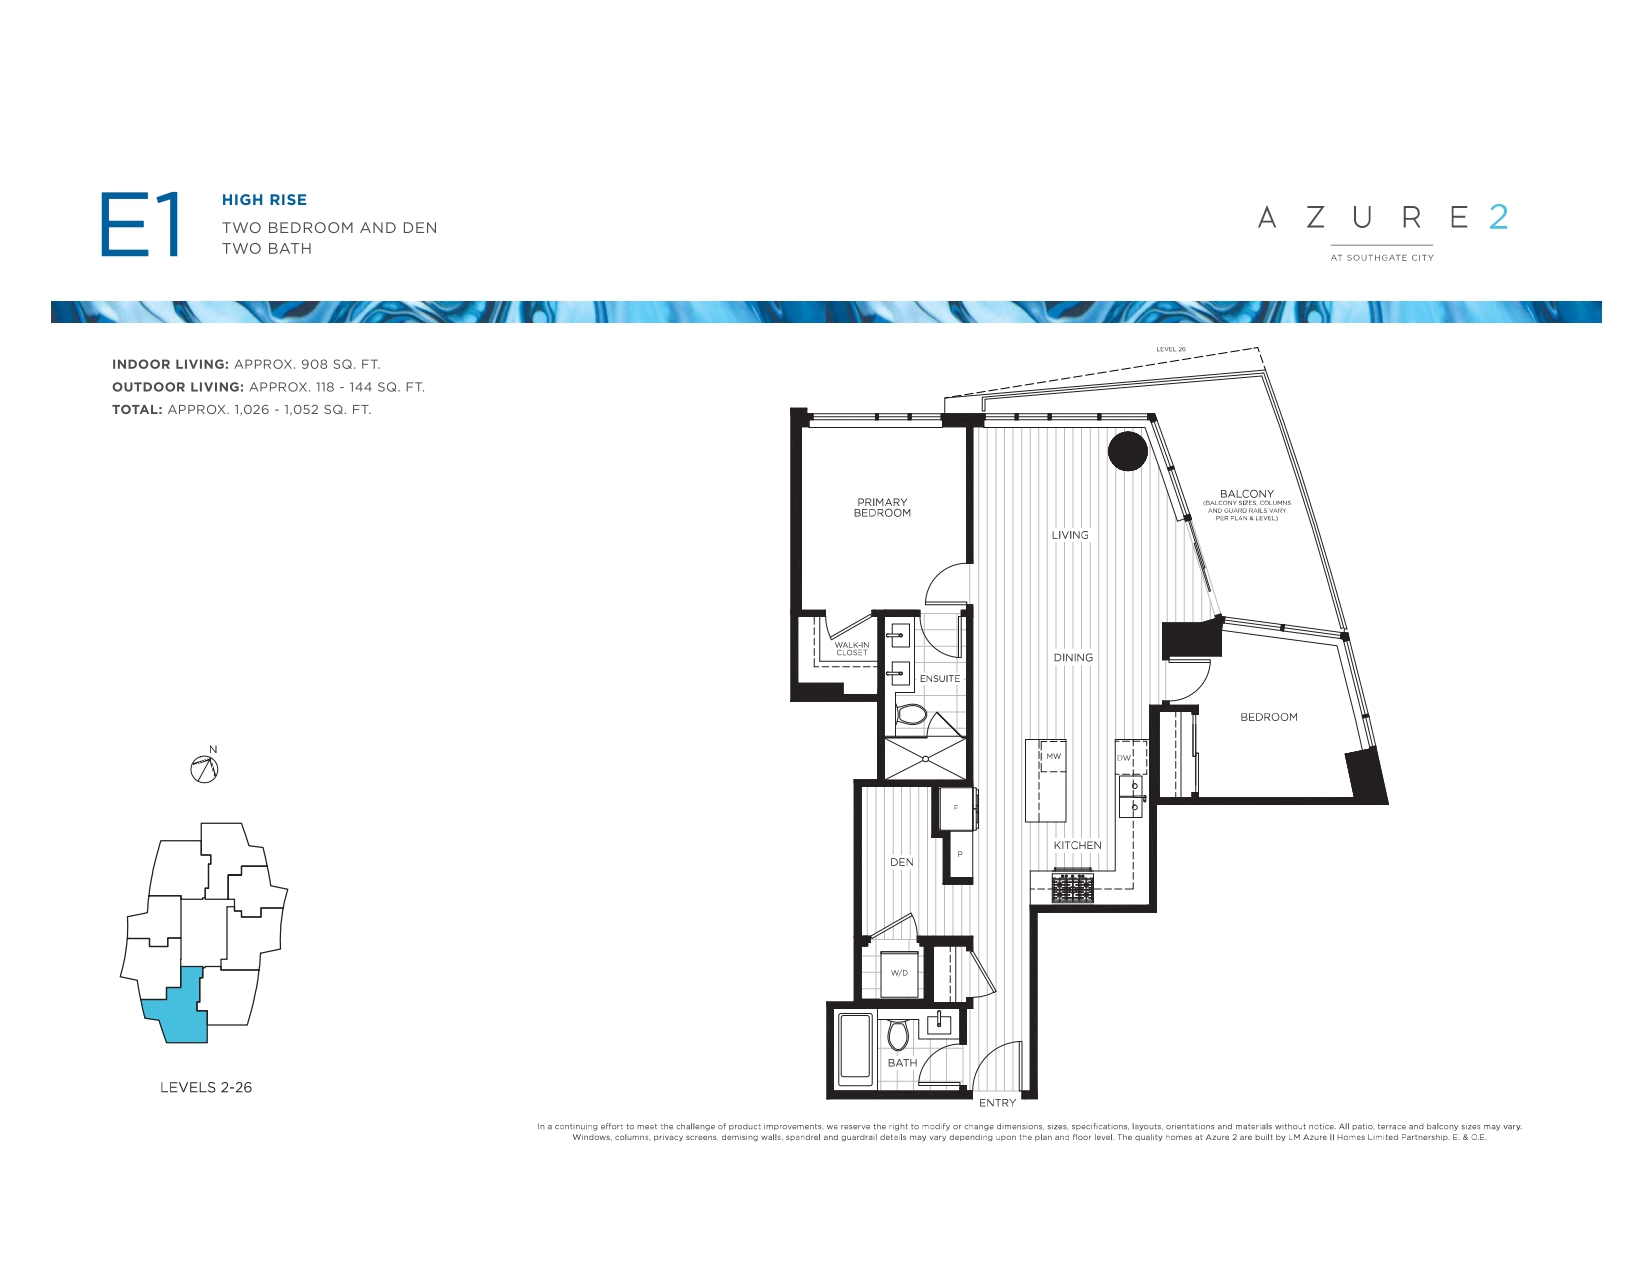 E1 Floor Plan of Azure 2 Condos with undefined beds